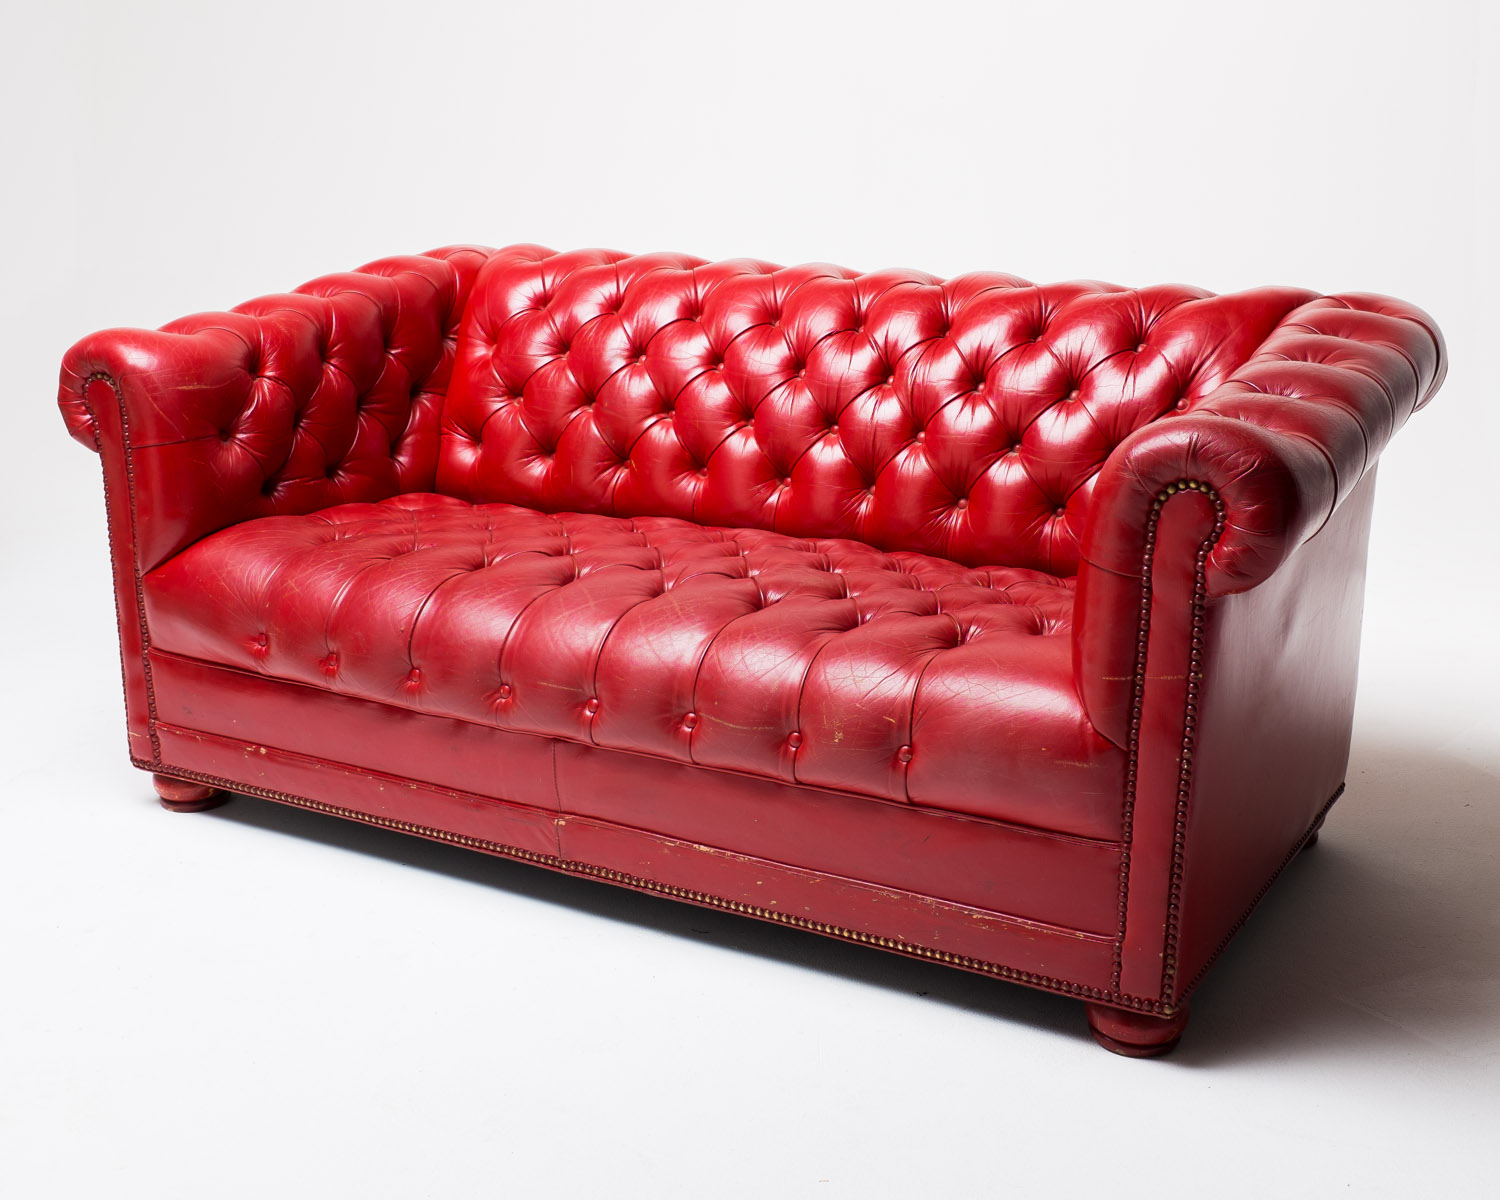 Co002 Red Leather Sofa Prop Al, Dark Red Leather Couch